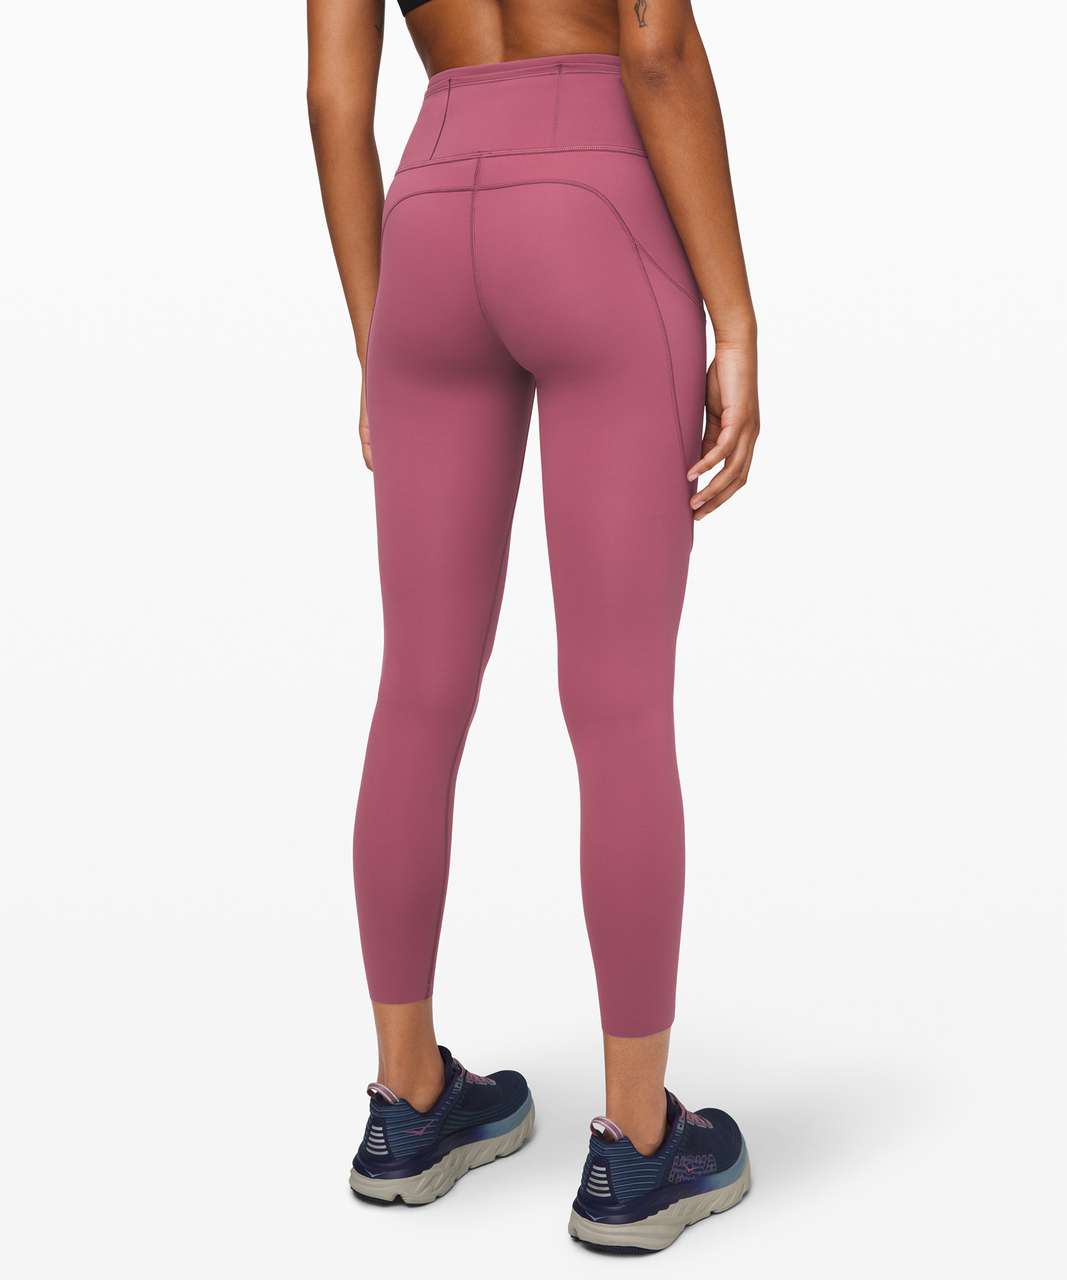 Lululemon Fast and Free Tight II 25 *Non-Reflective Nulux - Pace